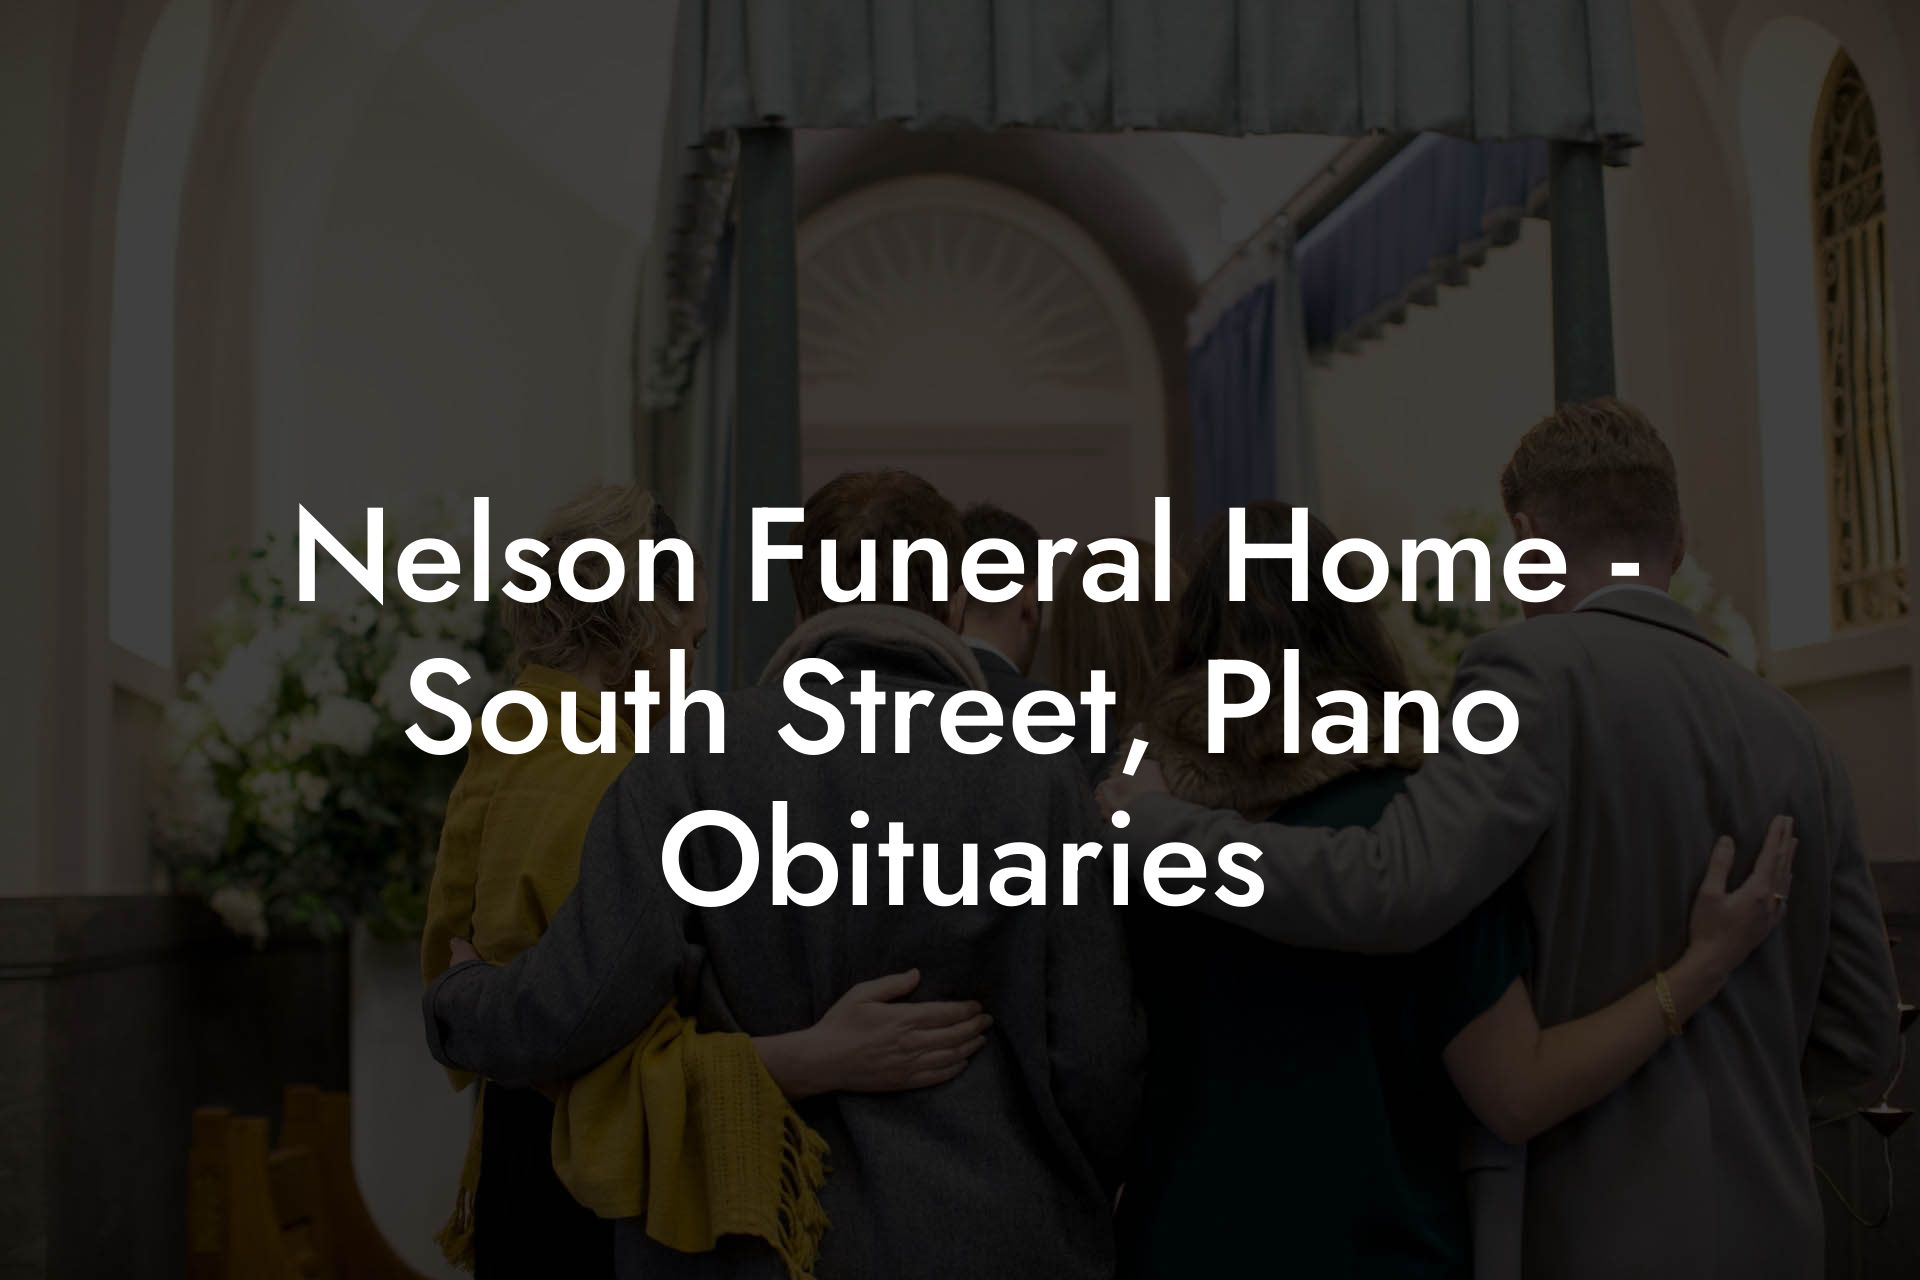 Nelson Funeral Home - South Street, Plano Obituaries